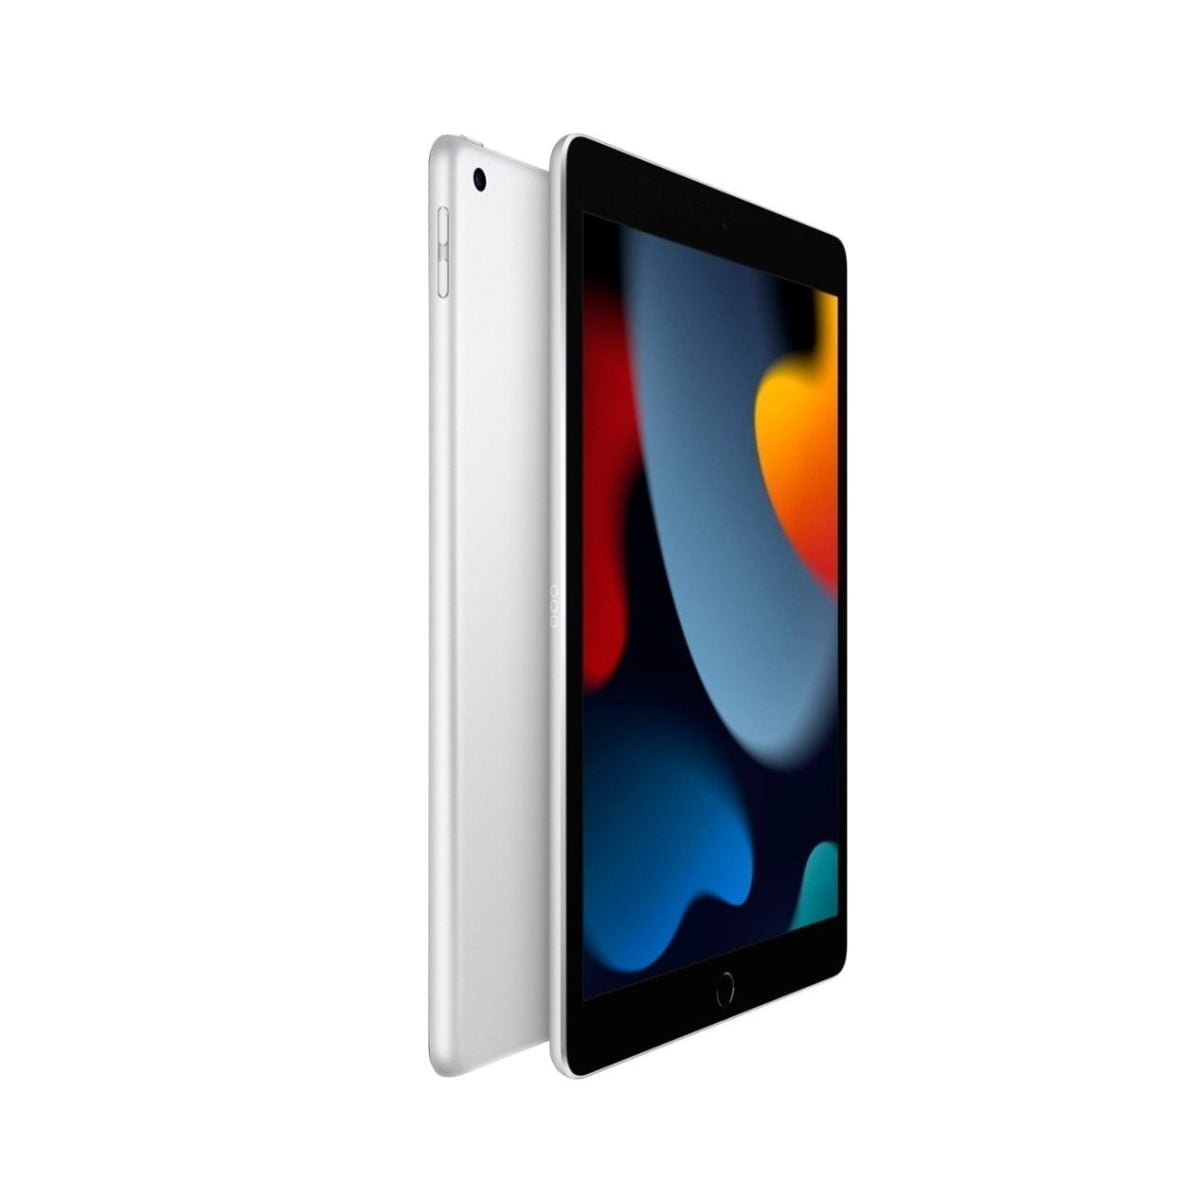 4901868Cv11D Apple &Lt;H1&Gt;Apple 10.2-Inch Ipad (9Th Generation) With Wi-Fi - 64Gb - Silver&Lt;/H1&Gt; Https://Www.youtube.com/Watch?V=Loaocx5Xc9S Powerful. Easy To Use. Versatile. The New Ipad Has A Beautiful 10.2-Inch Retina Display, Powerful A13 Bionic Chip, An Ultra Wide Front Camera With Center Stage, And Works With Apple Pencil And The Smart Keyboard.¹ Ipad Lets You Do More, More Easily. All For An Incredible Value. Ipad Apple 10.2-Inch Ipad (9Th Generation) With Wi-Fi - 64Gb - Silver Mk2L3